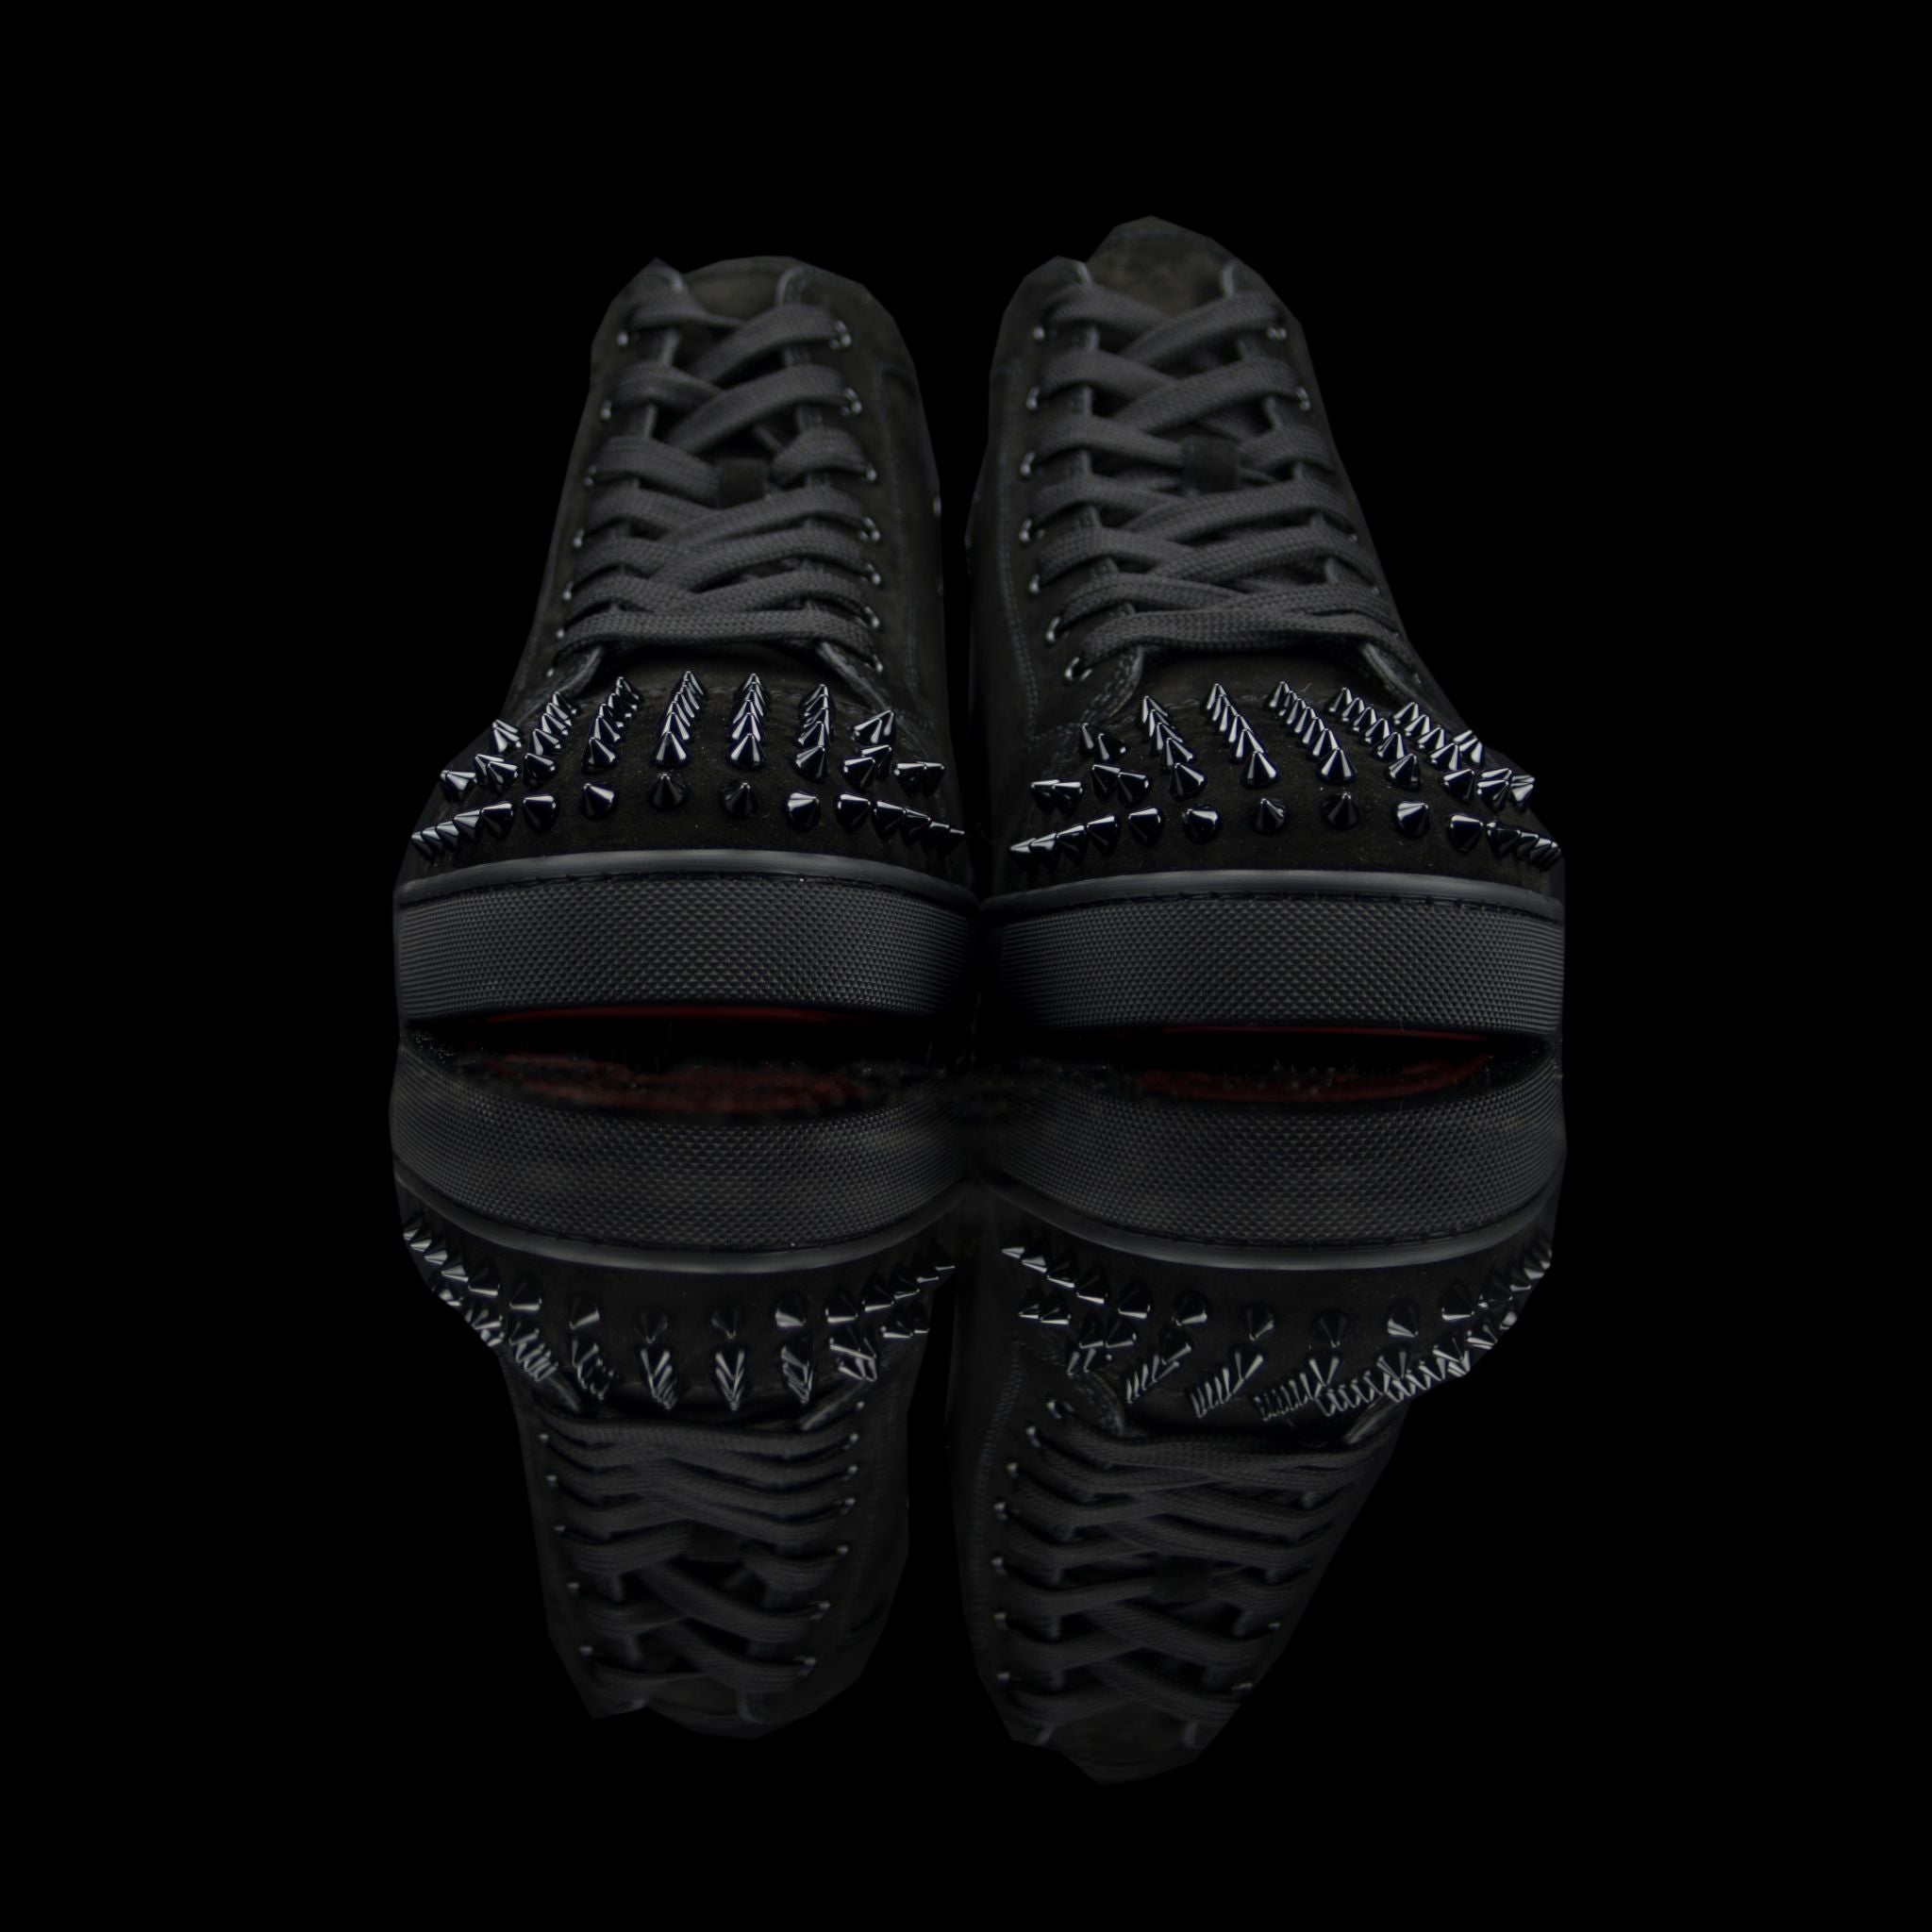 Christian Louboutin-Louis Flat High Spiked Toe-Pre Order Duration (3-5 Working Days) Product: 1140458 Colour: Black/Black Classic Material: Suede, Rubber Sole Mens Christian Louboutin Louis Spikes constructed in Flat Black Suede feature sleek looking spik